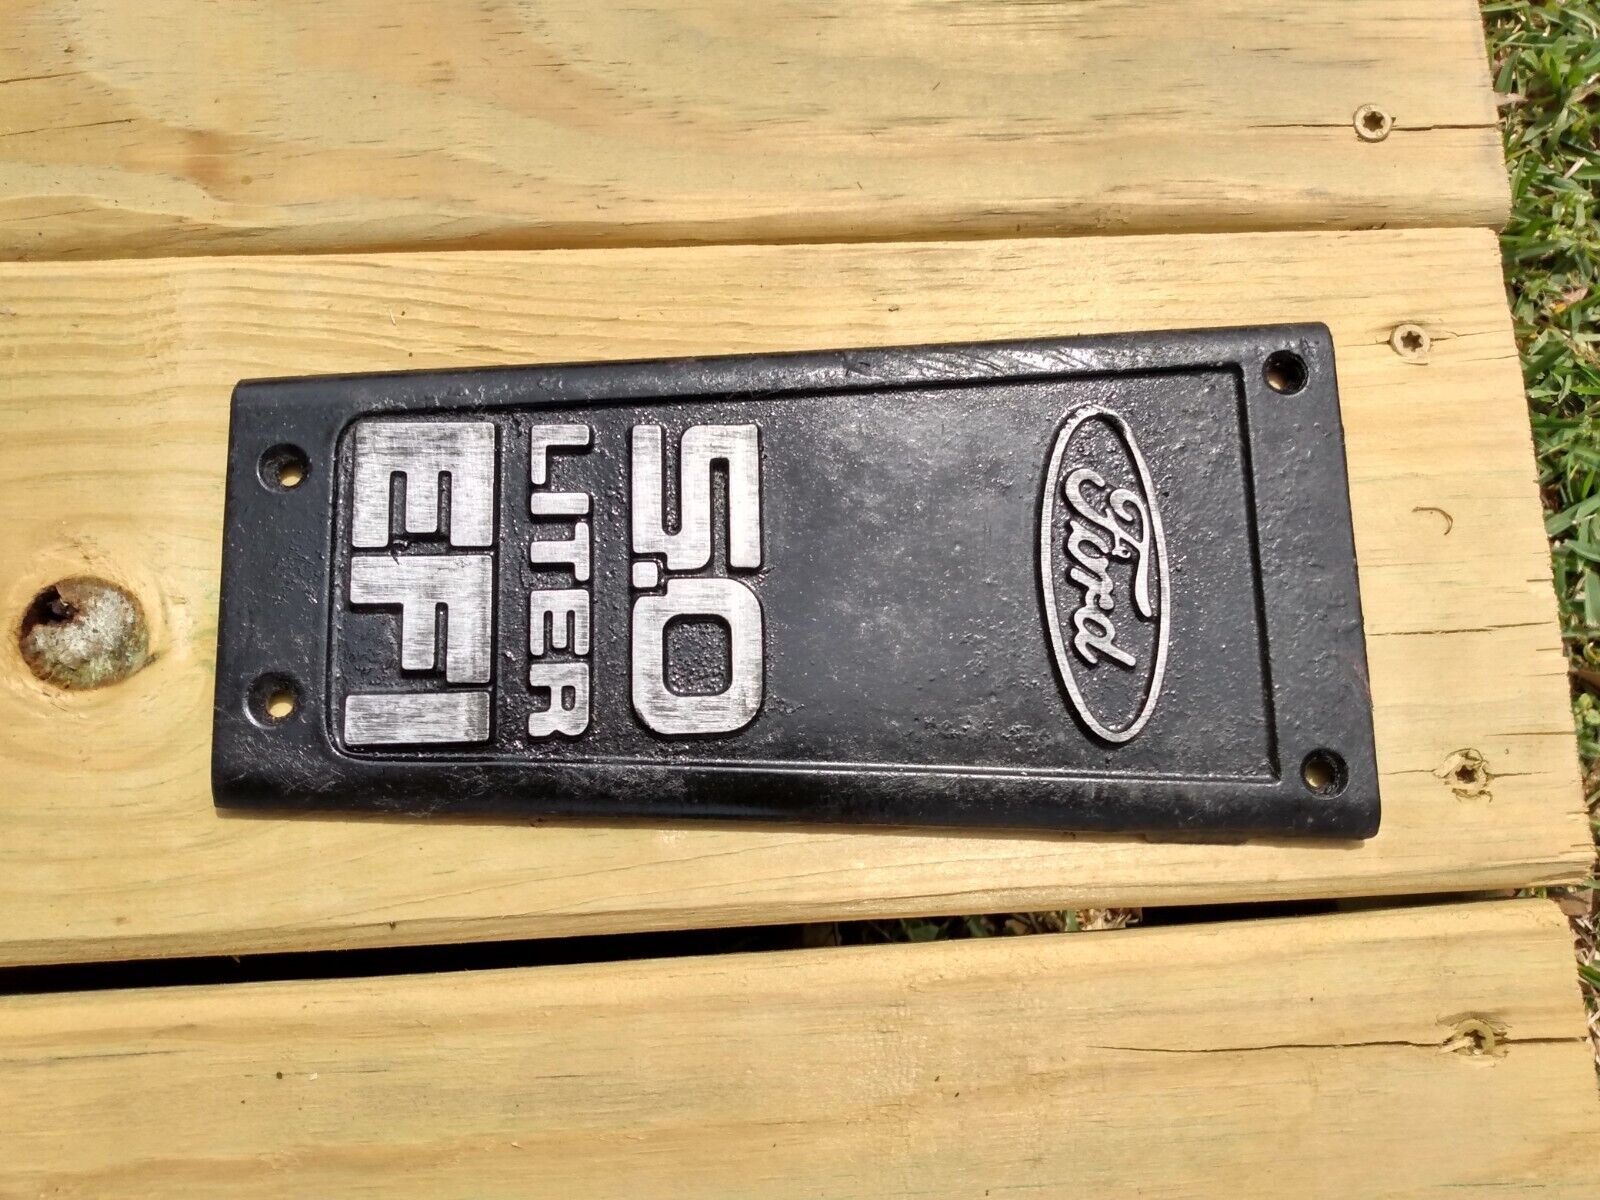 86 Ford Mustang 5.0 HO Intake Manifold Top Trim Cover Plate 302 EFI